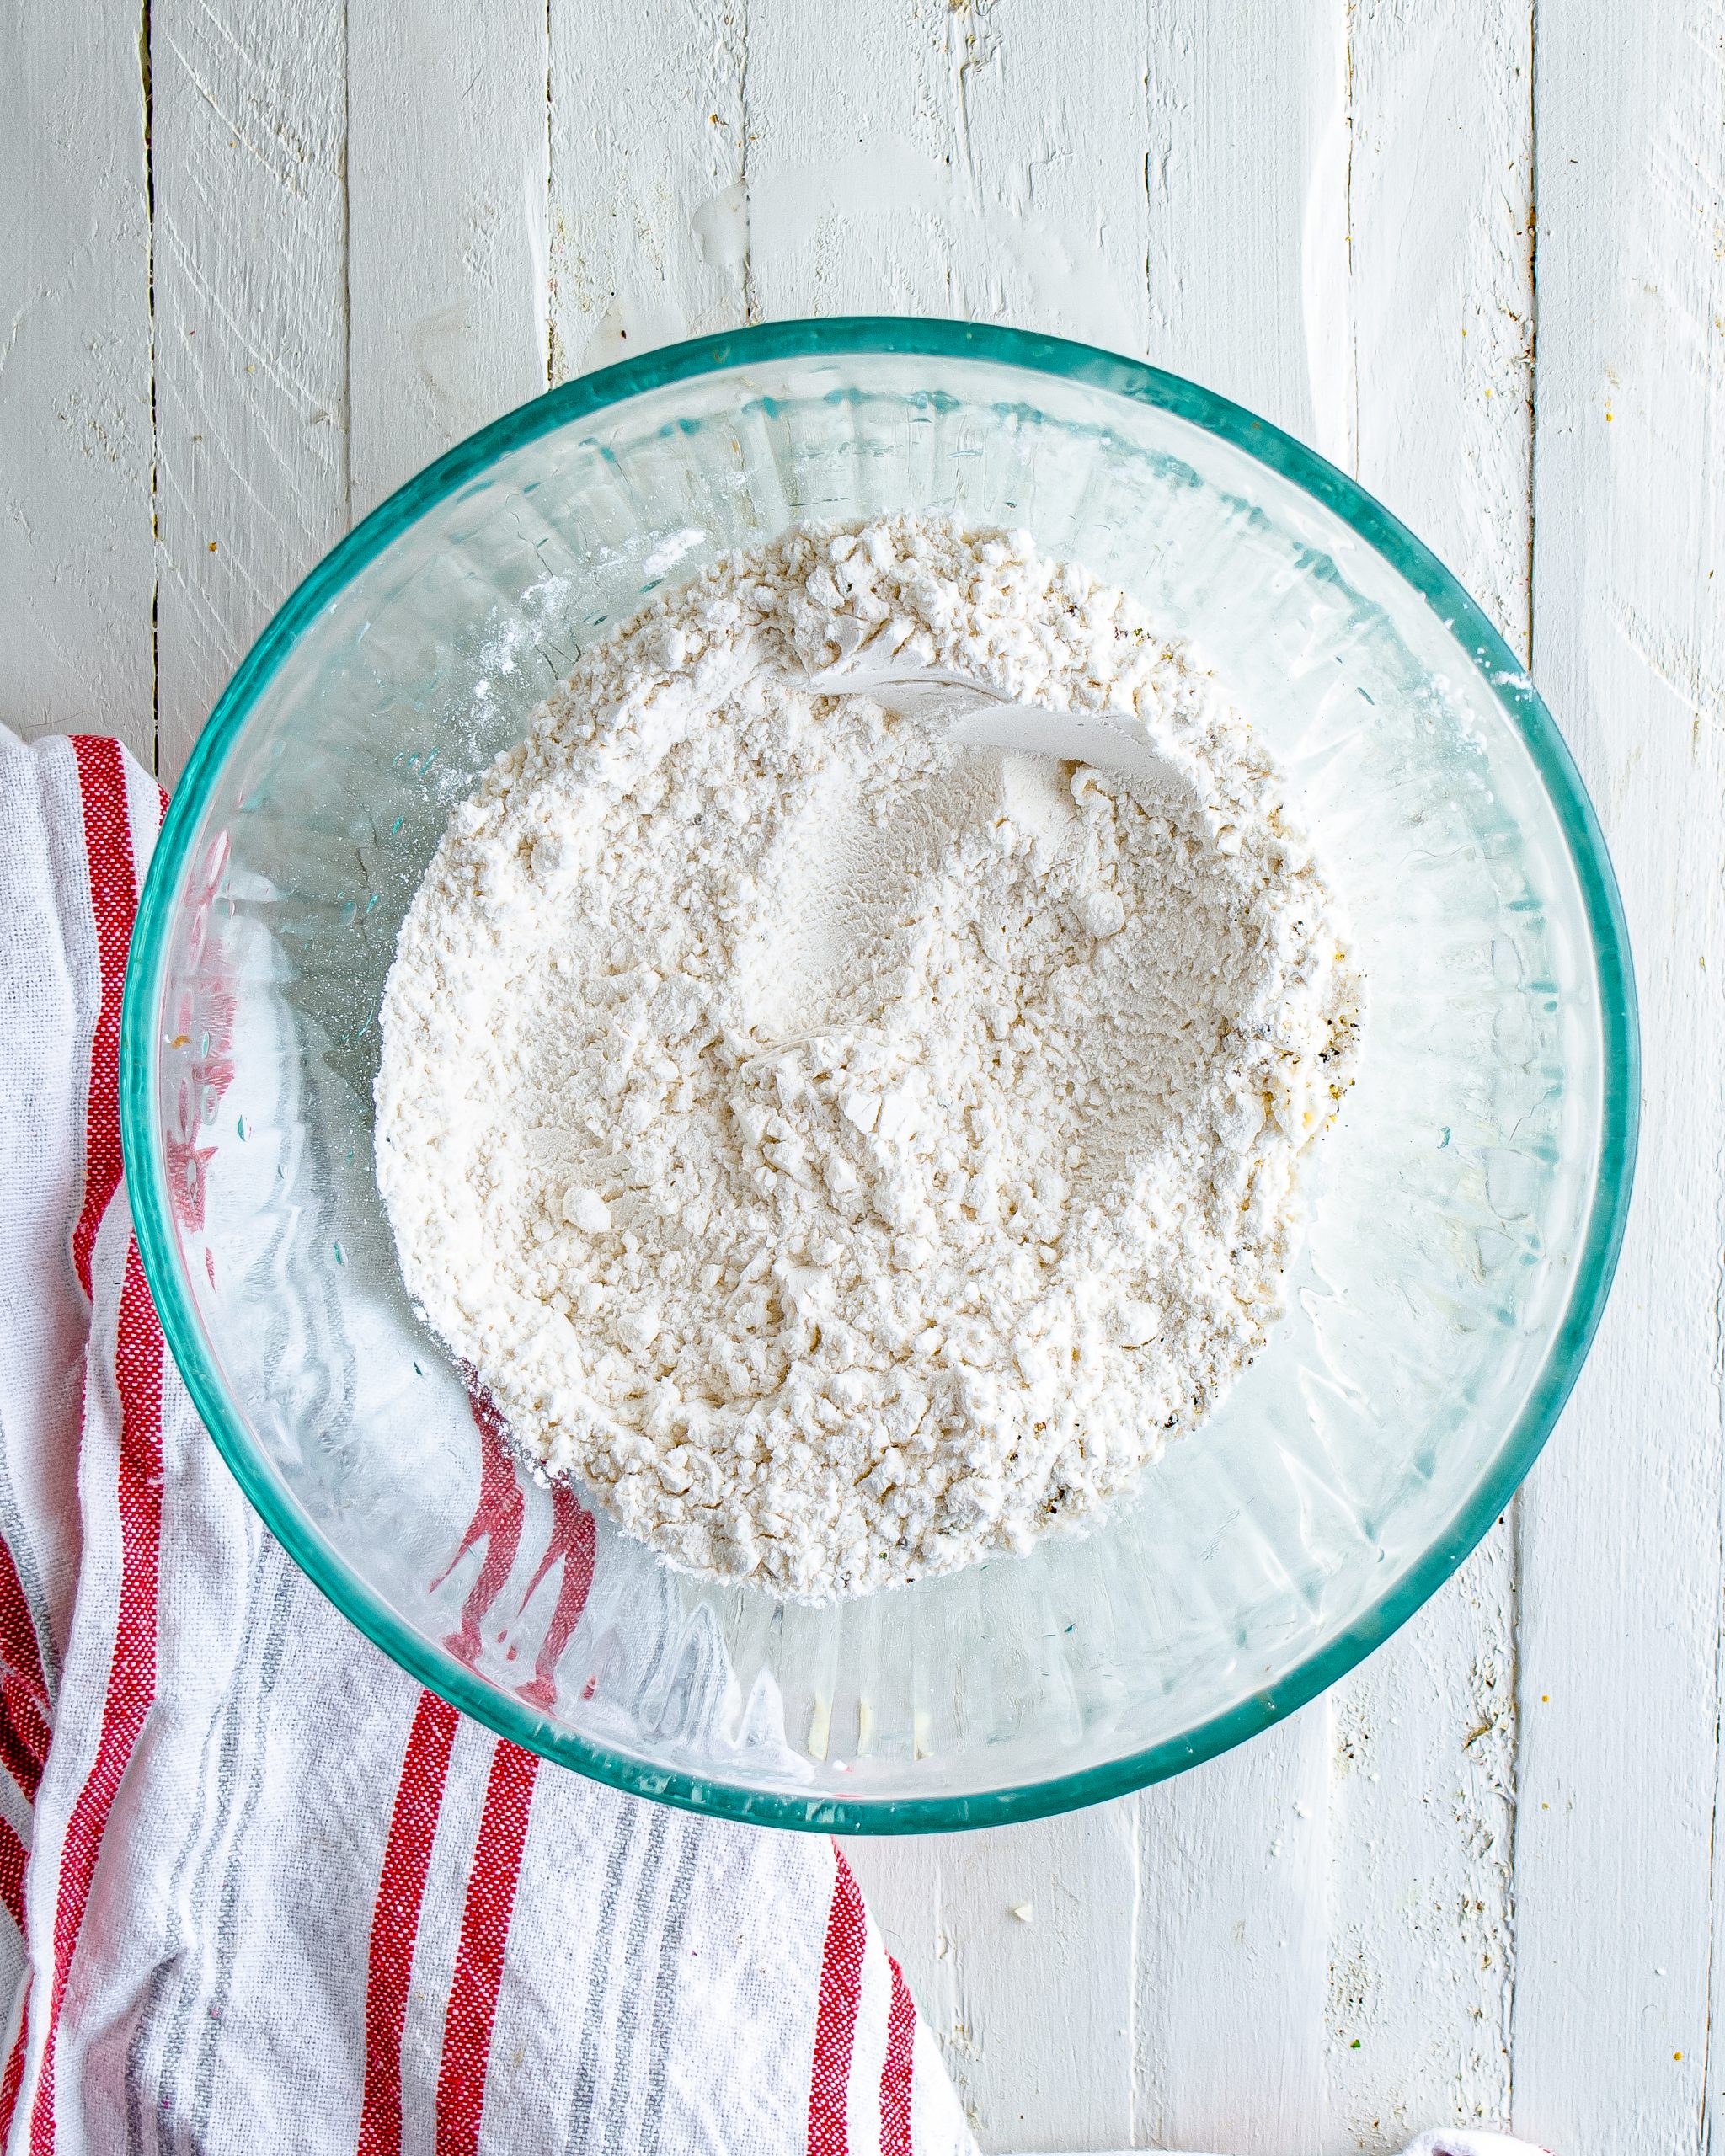 Add the flour to a separate shallow bowl, and season with salt and pepper. 